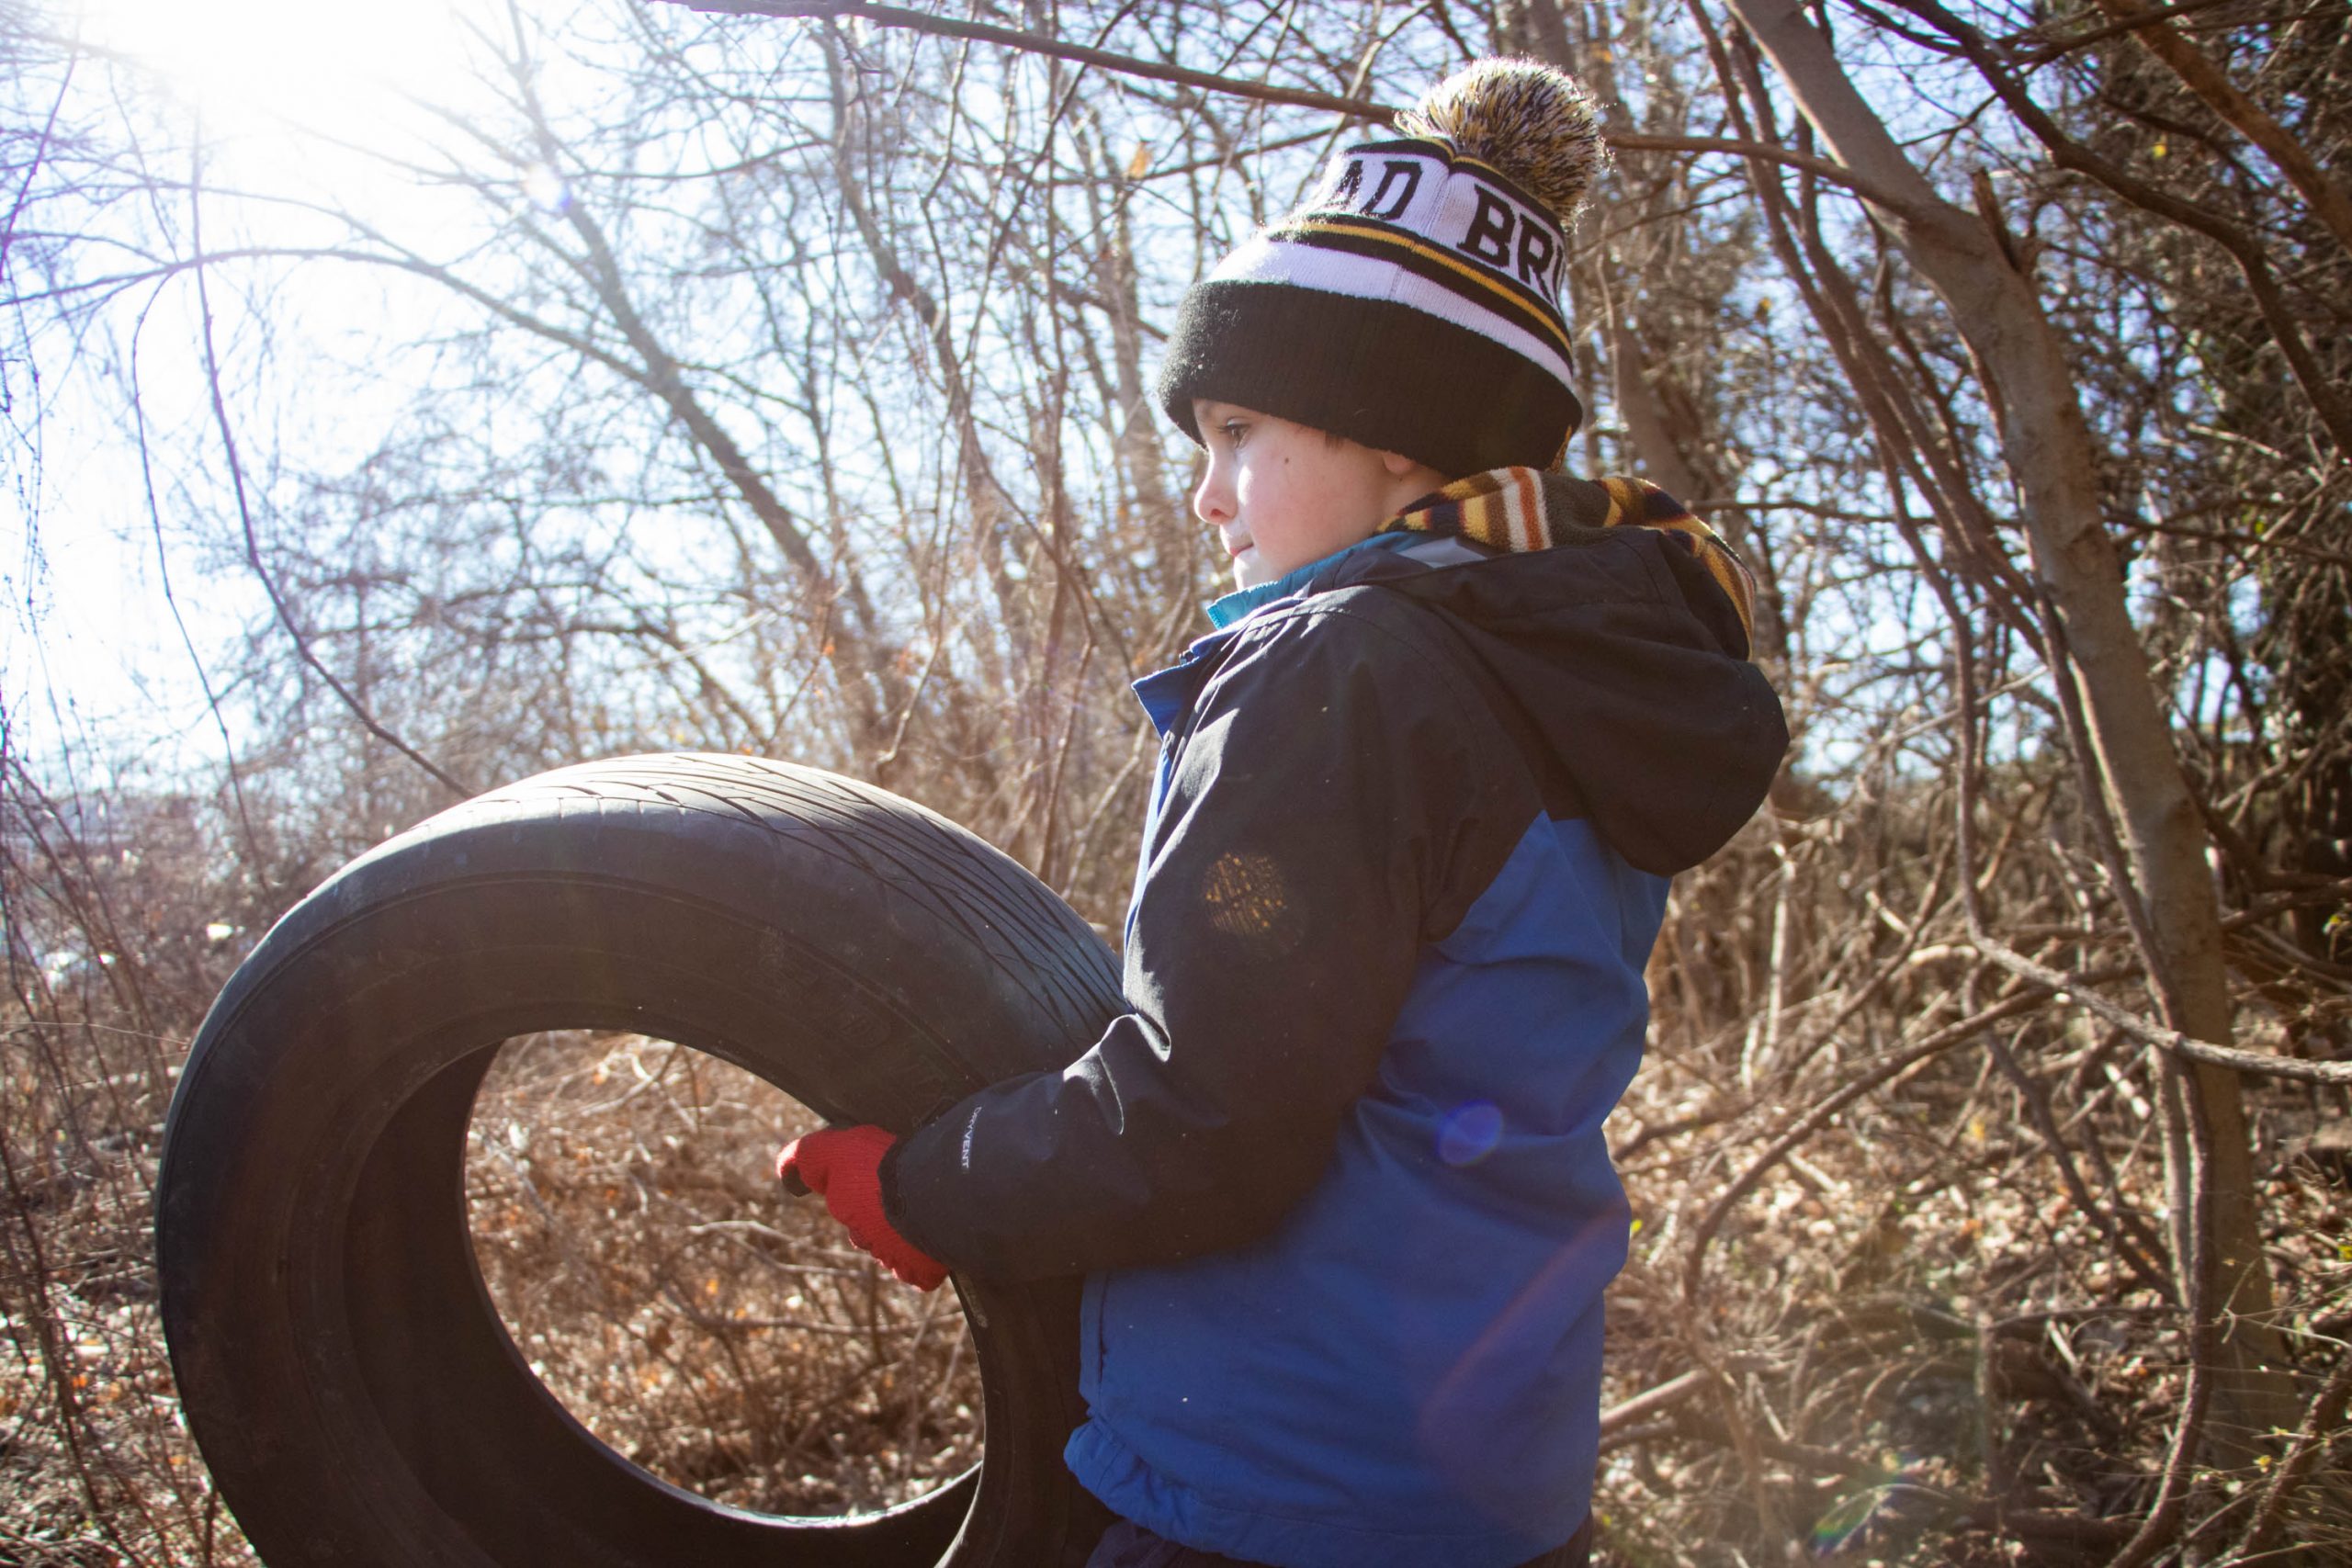 Six-year-old Bill Jack helps move tires that were illegally dumped in Pope Branch Park on Saturday. (Isabel Miller | Medill News Service)